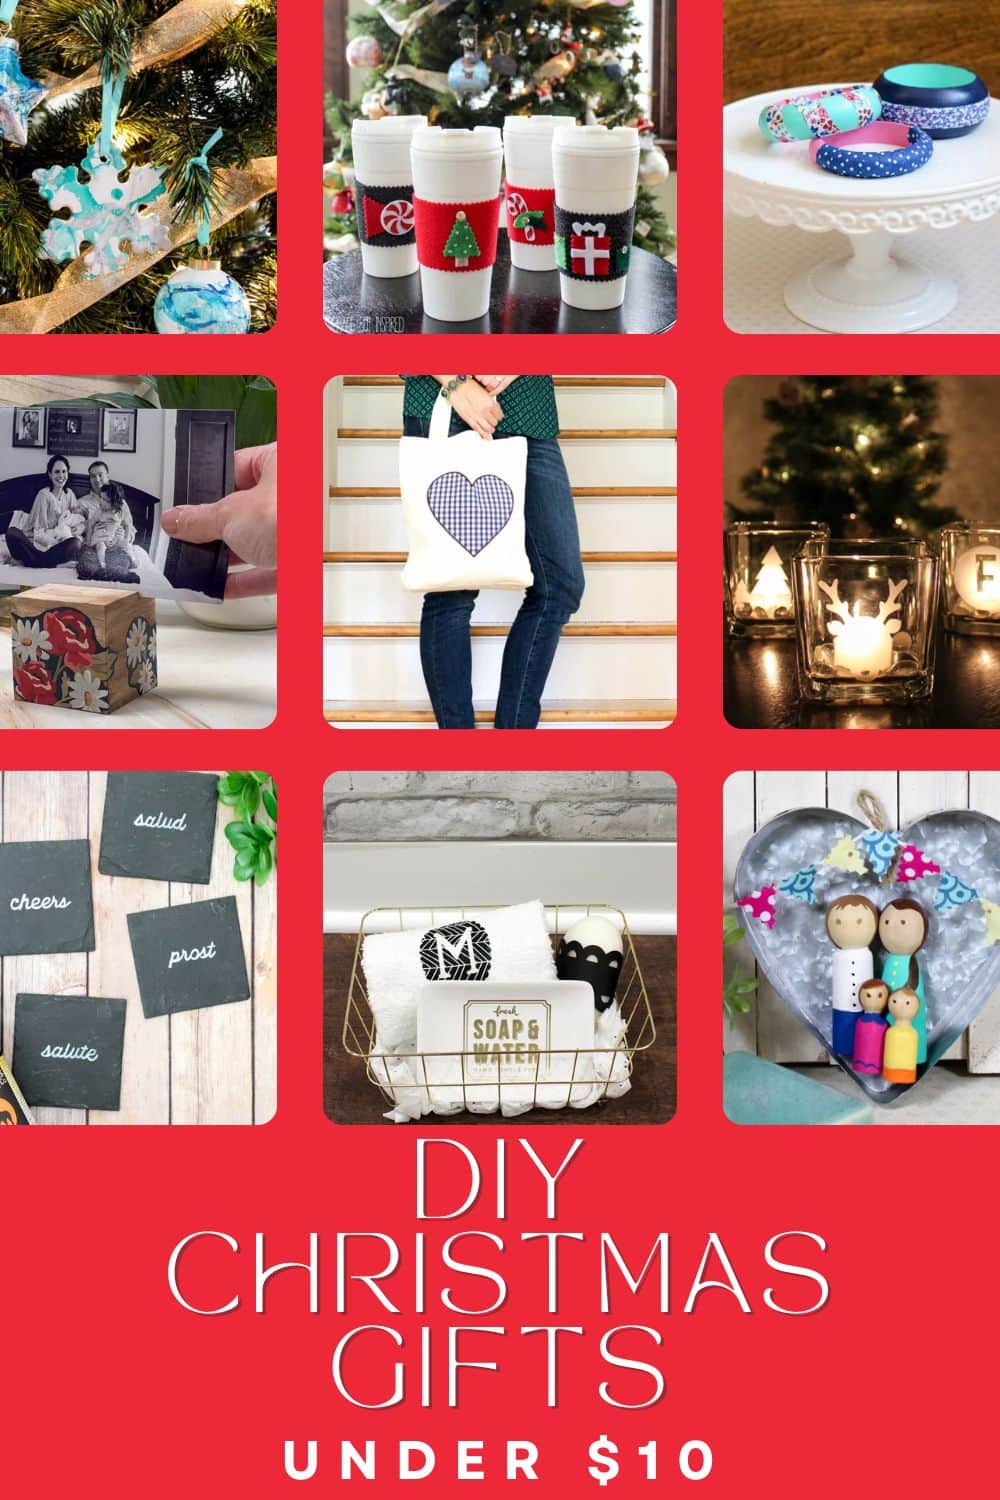 15 DIY Holiday Gift Ideas for Under $10